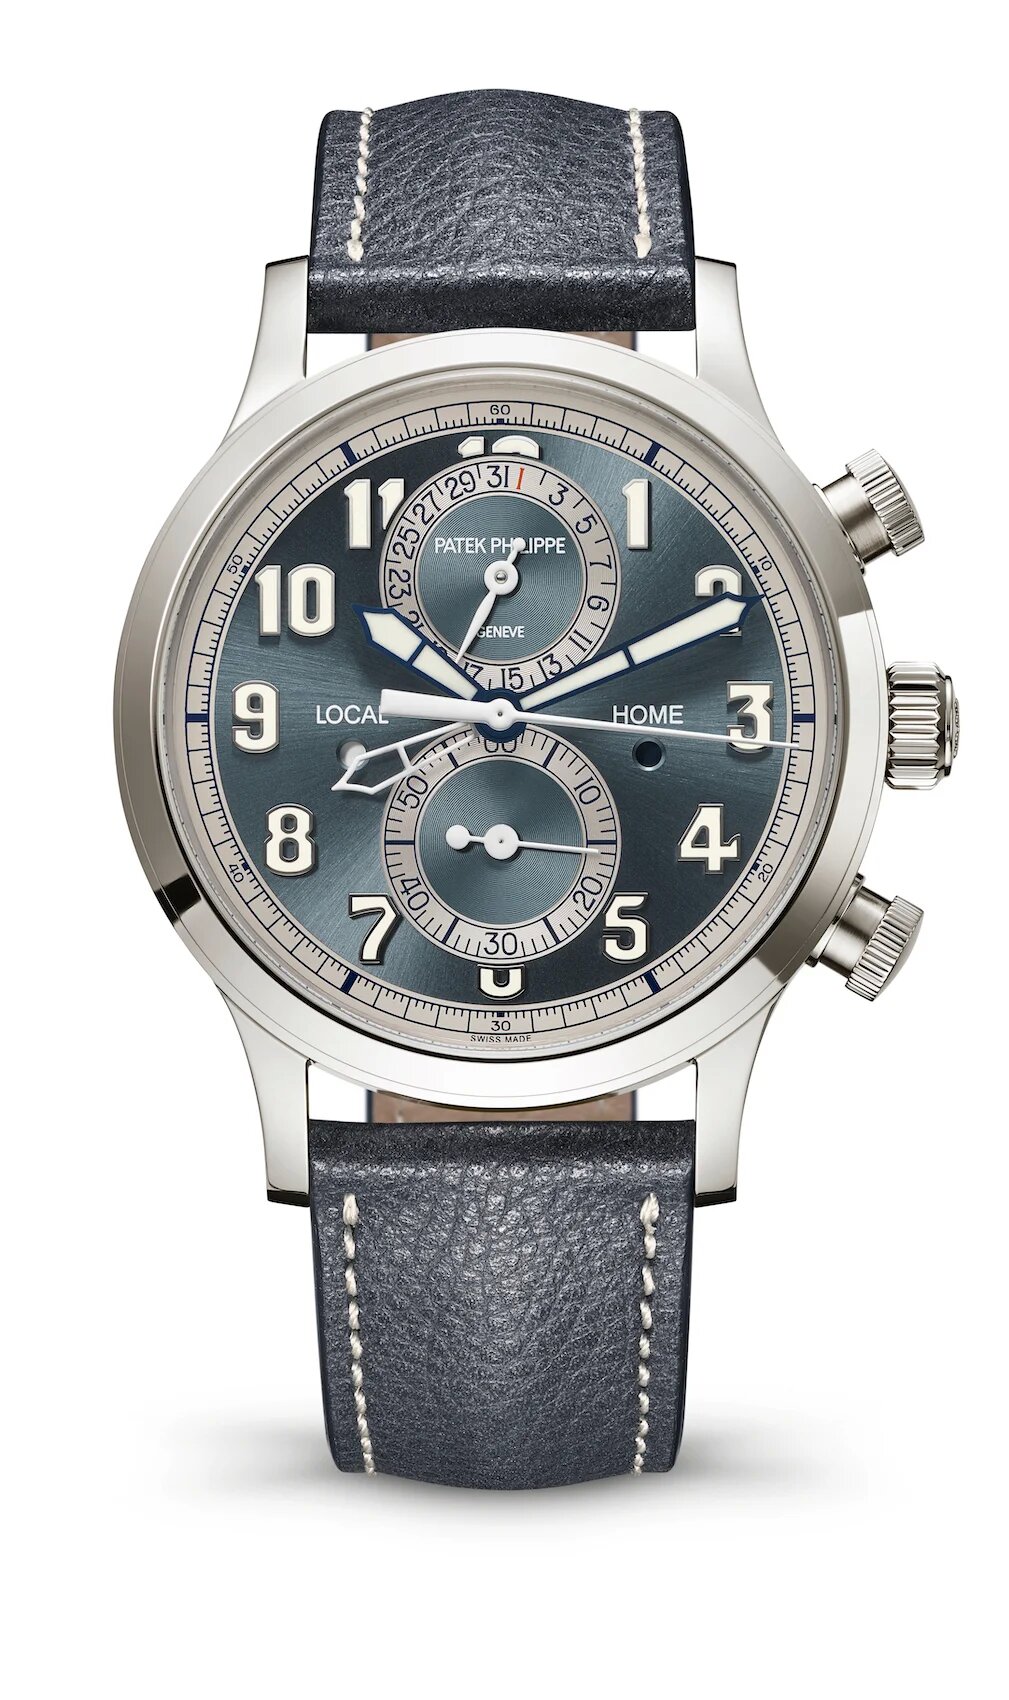 UK Perfect Replica Patek Philippe wows with the Calatrava Pilot Travel Time Chronograph in white gold